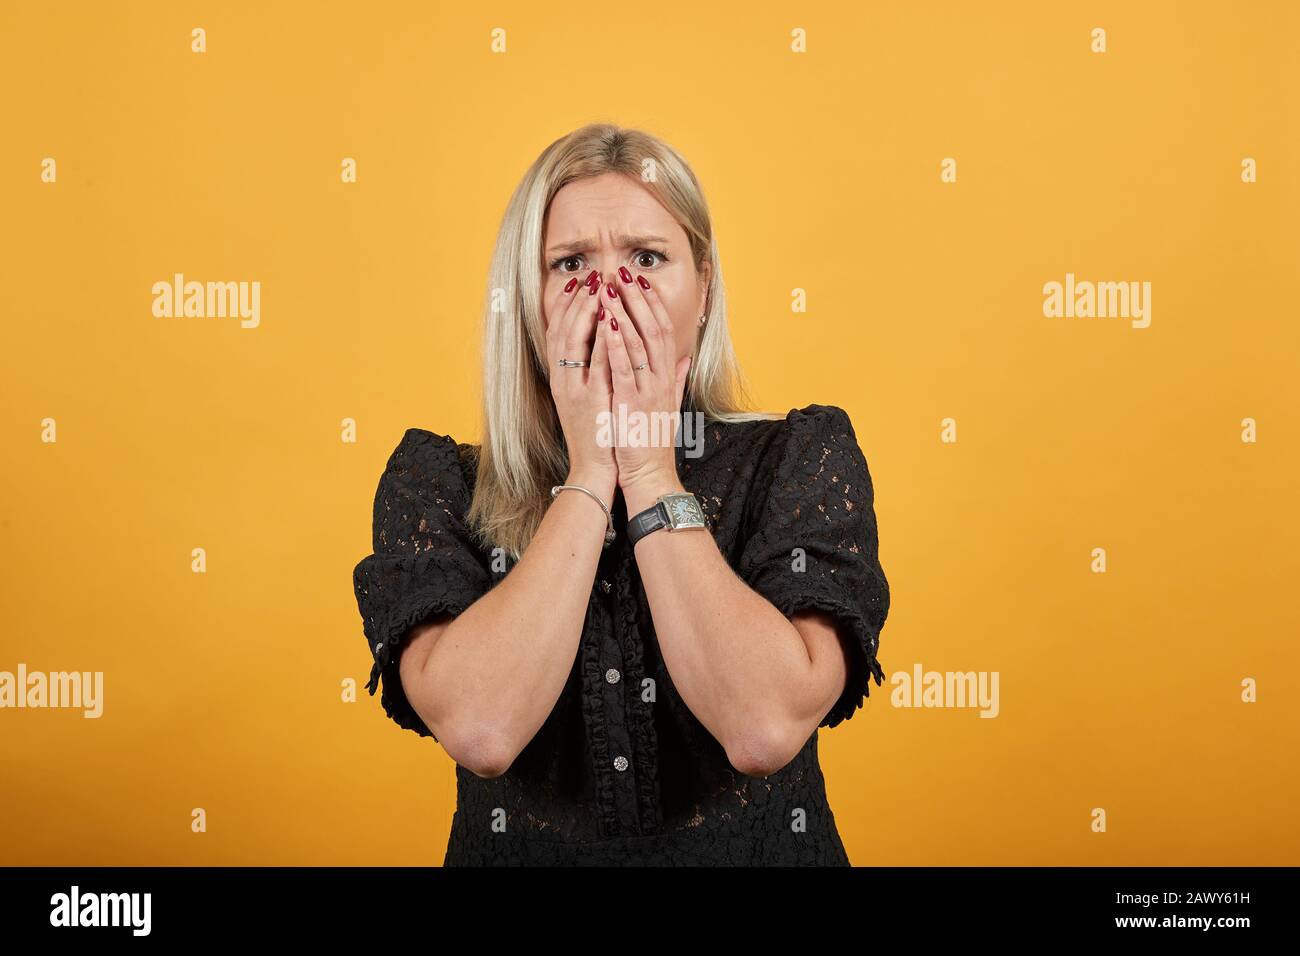 girl in black dress upset dissatisfied covered face with her hands from bad mood Stock Photo